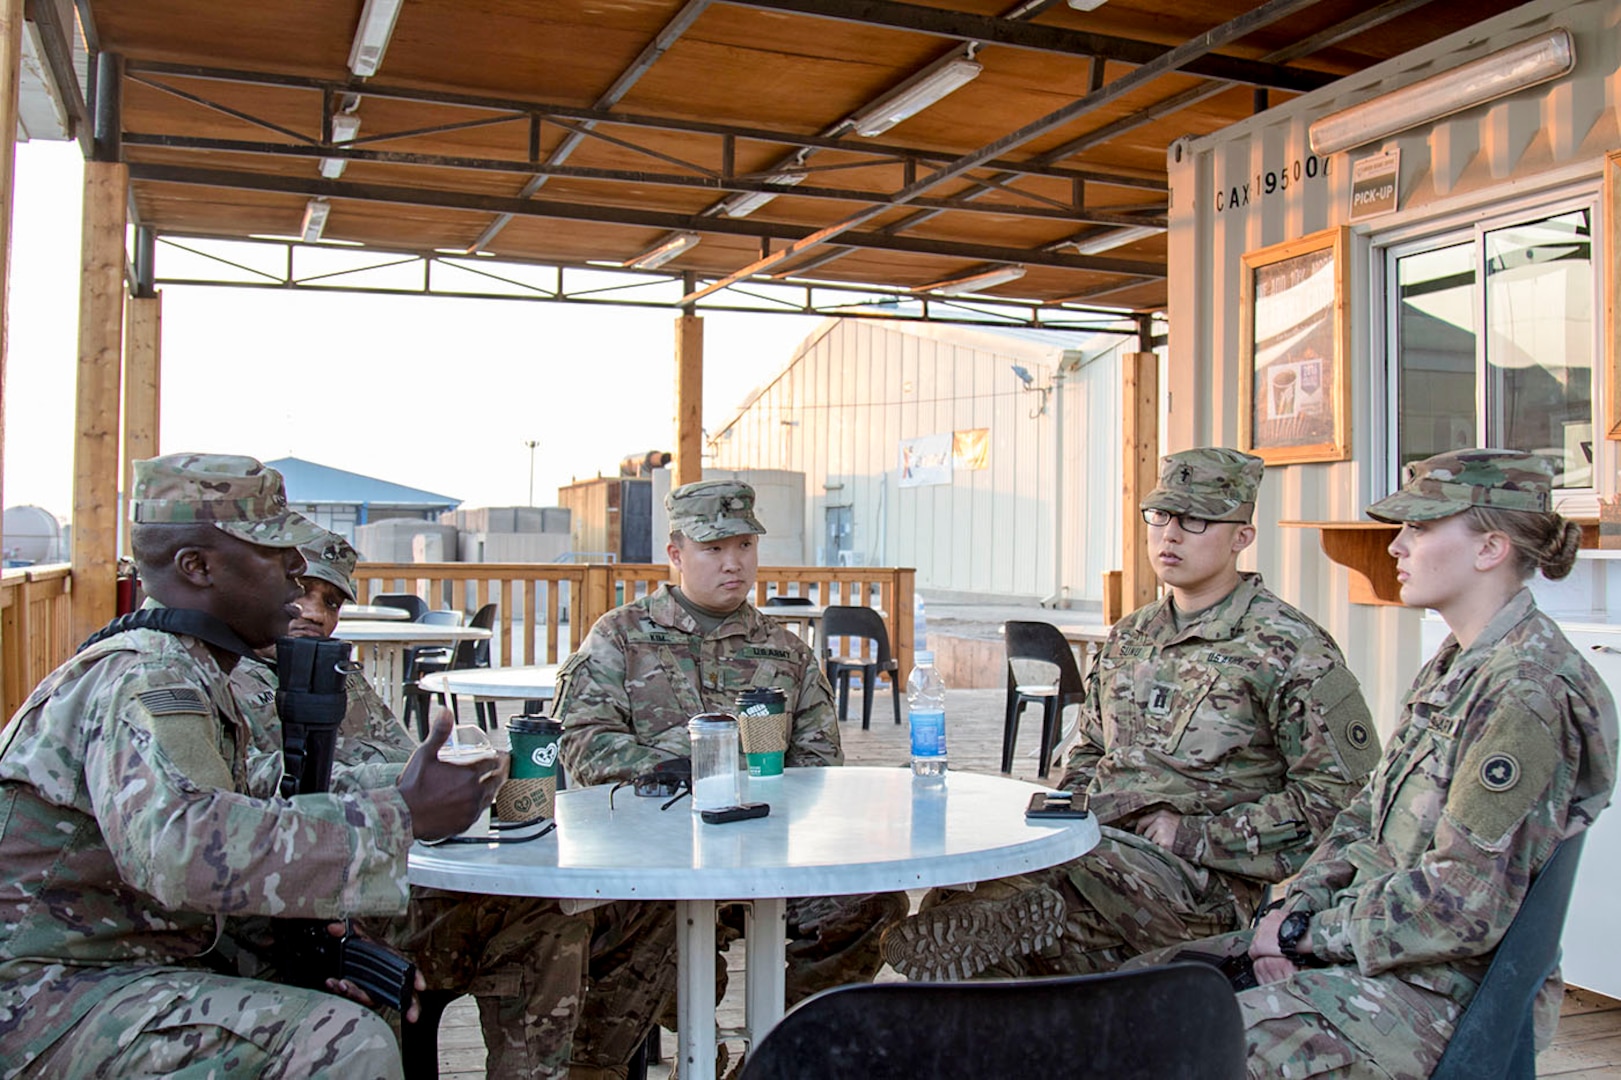 Master Sgt. Samuel W. Gilpin, 1st Theater Sustainment Command, (near left), Staff Sgt. Anthony C. Mills, (center left) and Maj. (CH) James S. Kim, (center), both with the 369th Sustainment Brigade, meet with Capt. Bryan Sunu, (center right) and Spc. Zowie Sprague, (near right), both with the 314th Combat Sustainment Support Battalion, during a Unit Ministry Team battlefield circulation visit in Taji, Iraq, on Feb. 14, 2017. (U.S. Army photo by Sgt. Cesar E. Leon)